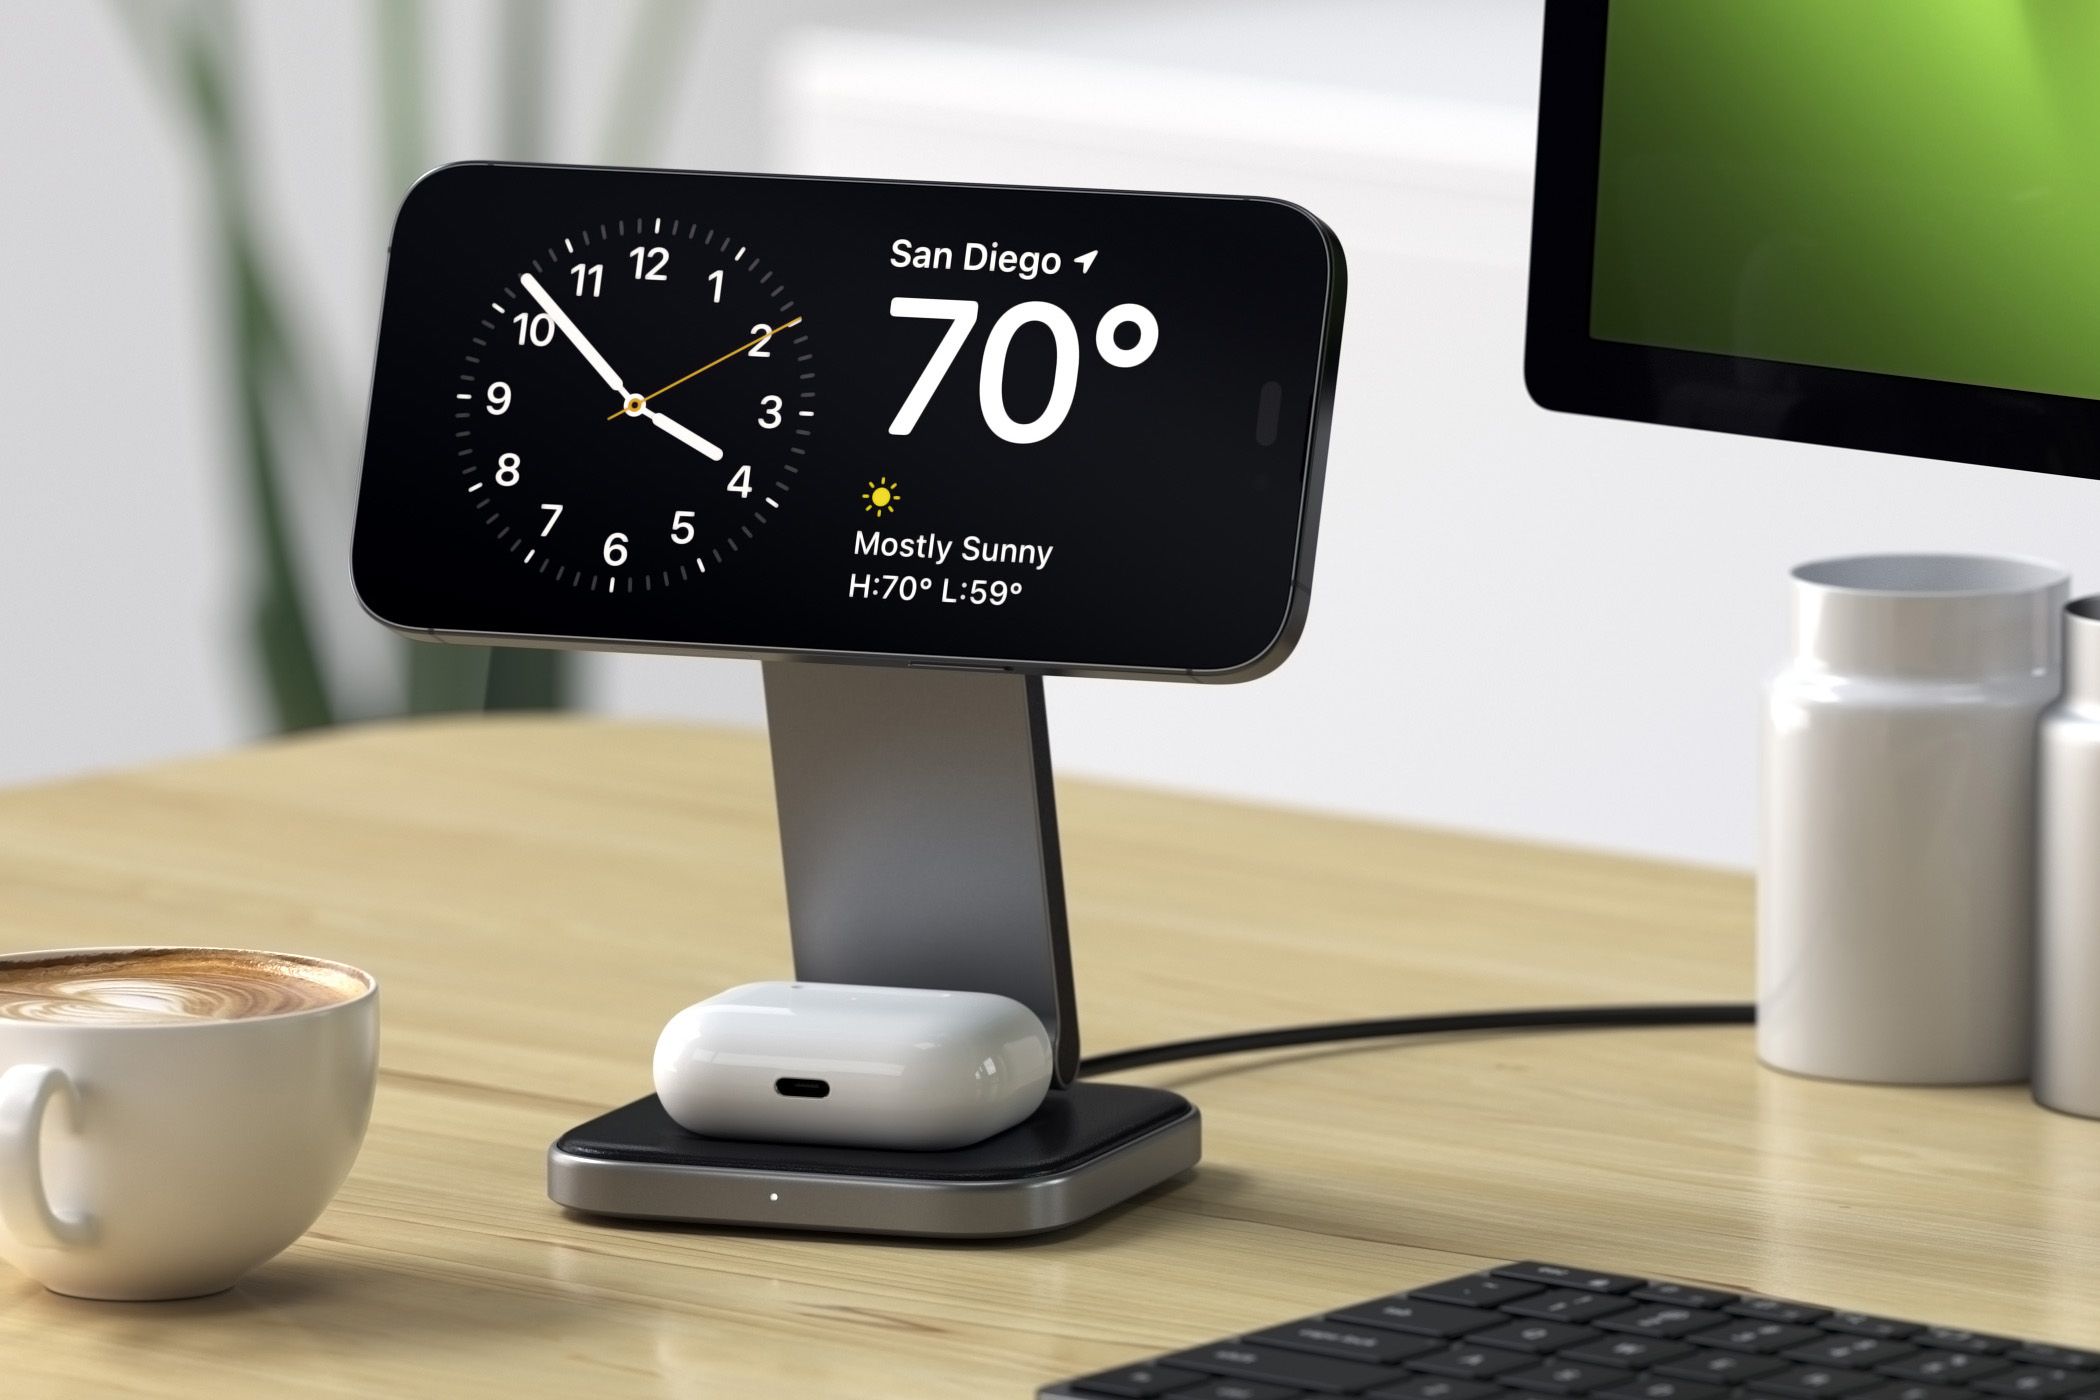 Charging stand on a desk holding an iPhone and an AirPods case